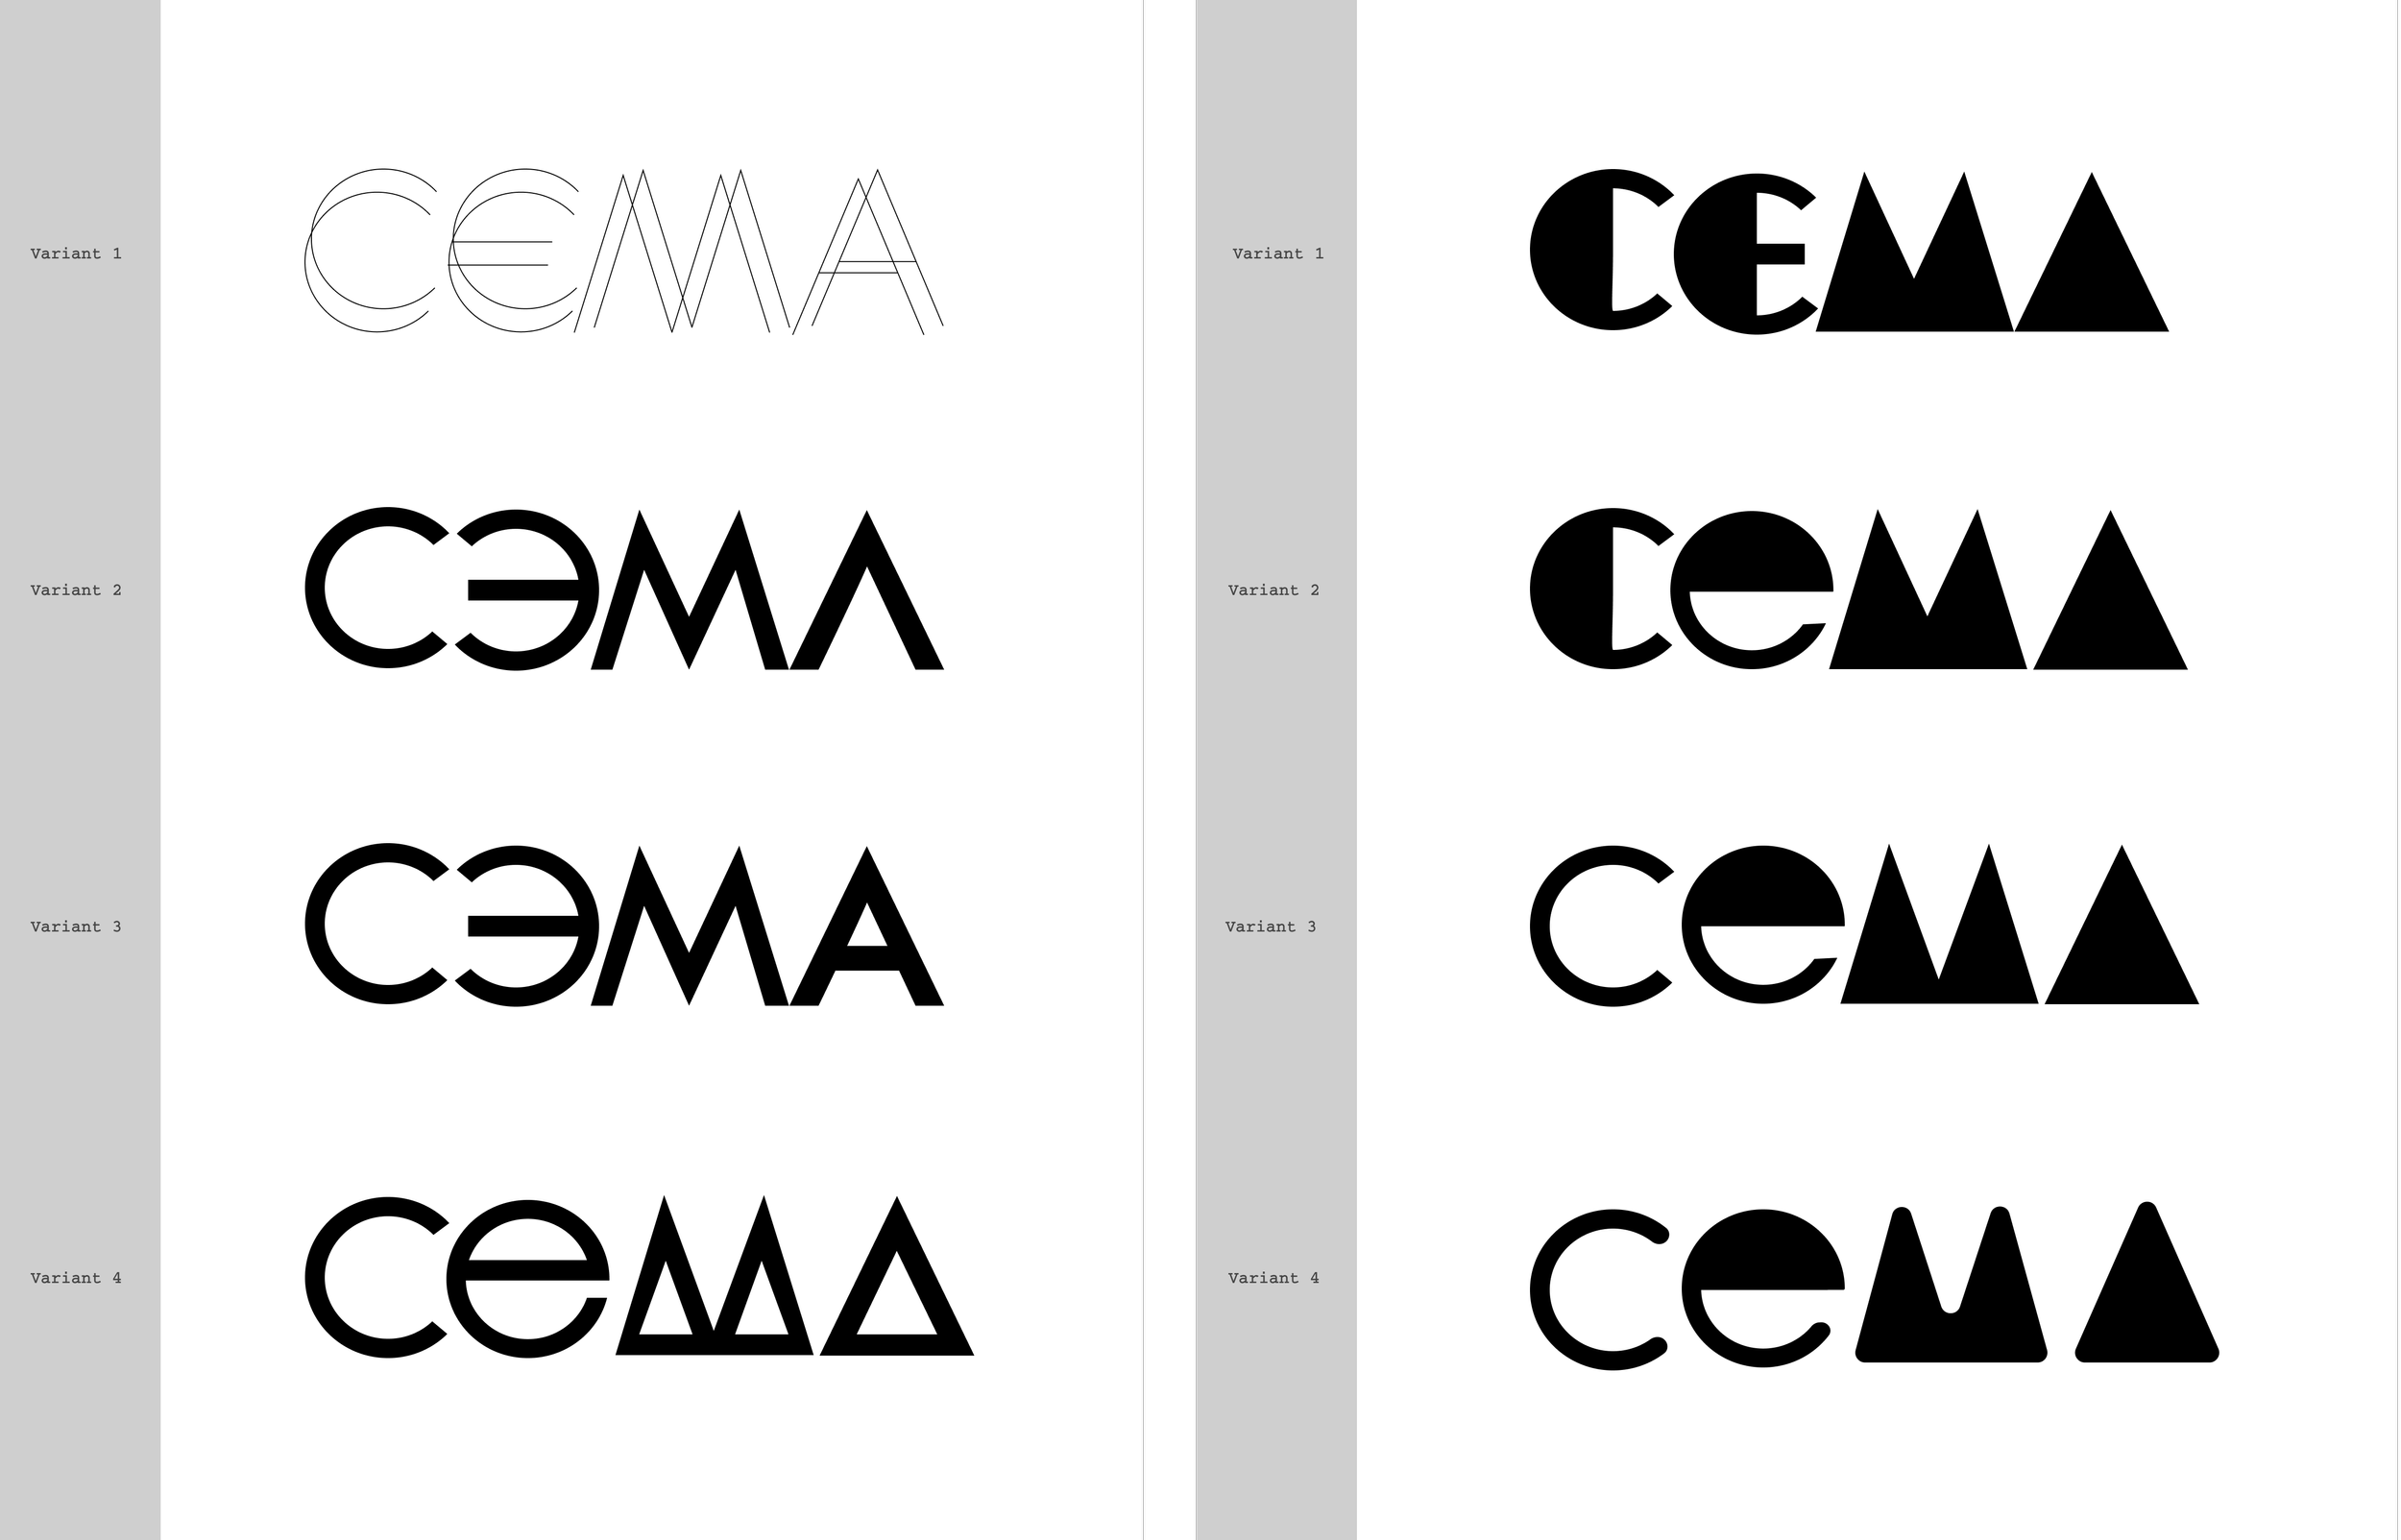  These were part of the initial round of typeface iterations. While other iterations may be based on existing typefaces, these first drafts were drawn from scratch and inspired by basic Modernist concepts and the geometry of circles and triangles. 